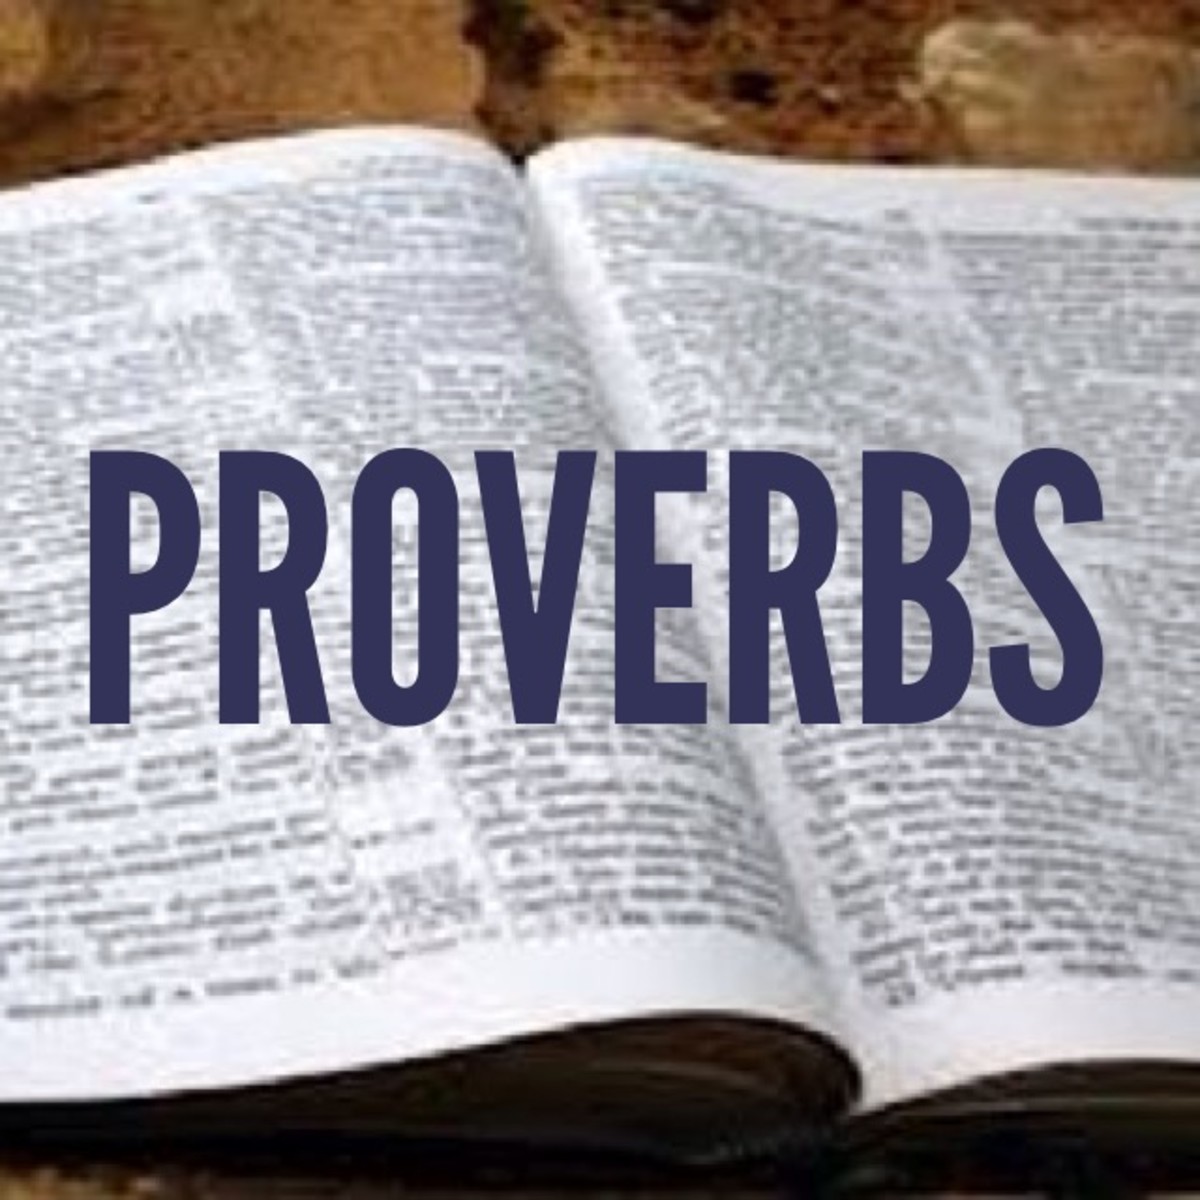 Do you know what Proverbs are?